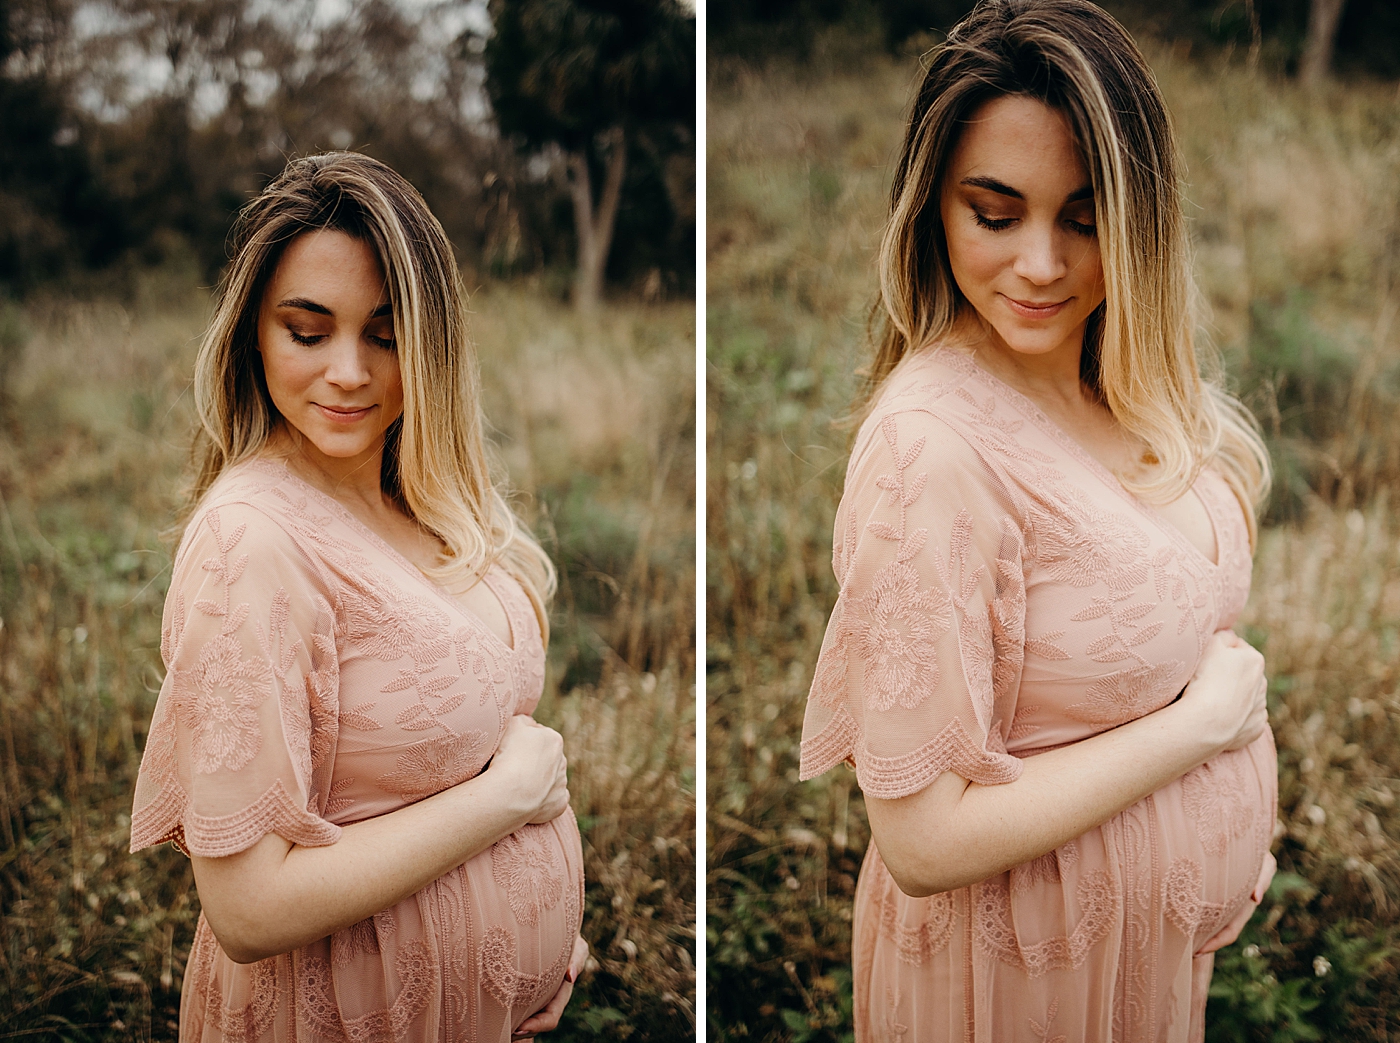 Pregnant woman holding stomach out in field Riverbend Park Maternity Photography by South Florida Family Photographer Maggie Alvarez Photography